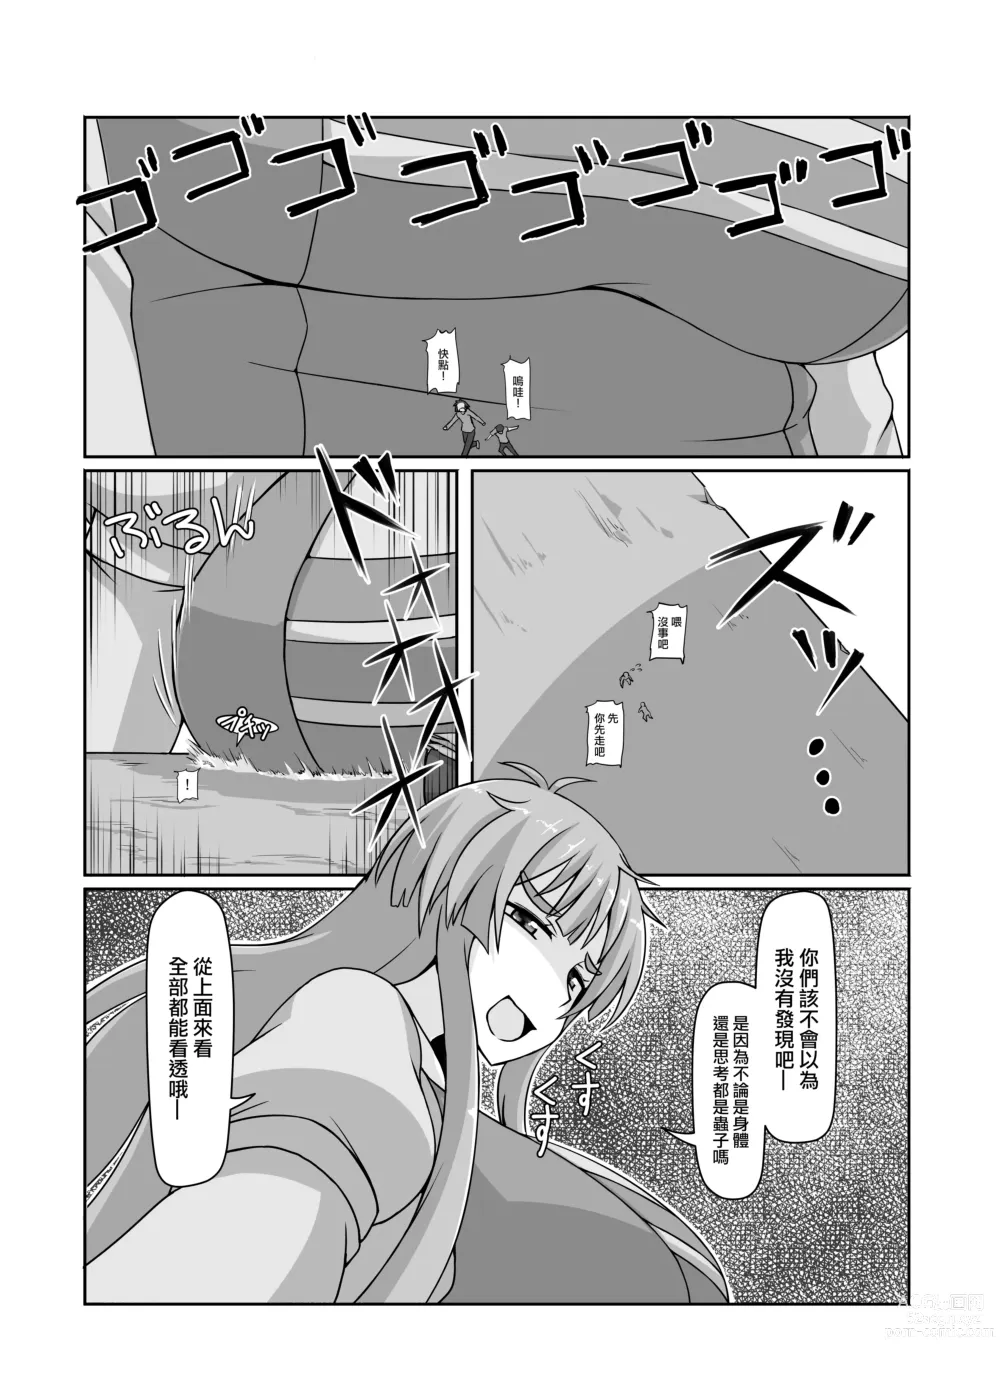 Page 6 of doujinshi 小小人類就由我來衰退